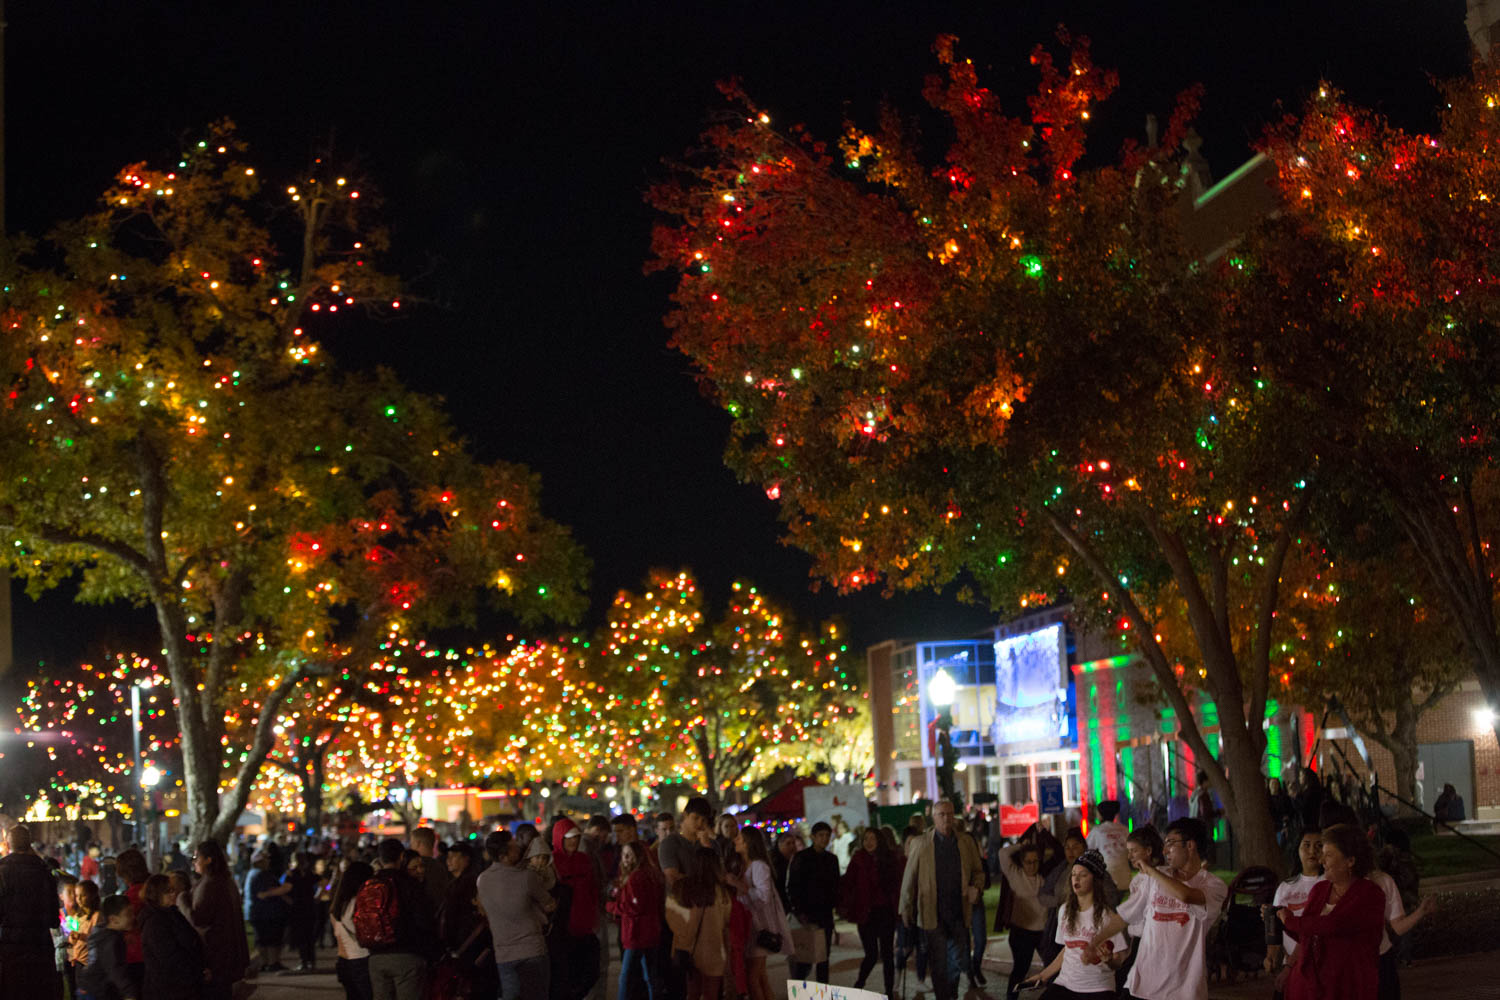 UIW's Light the Way is happening but will look different this year